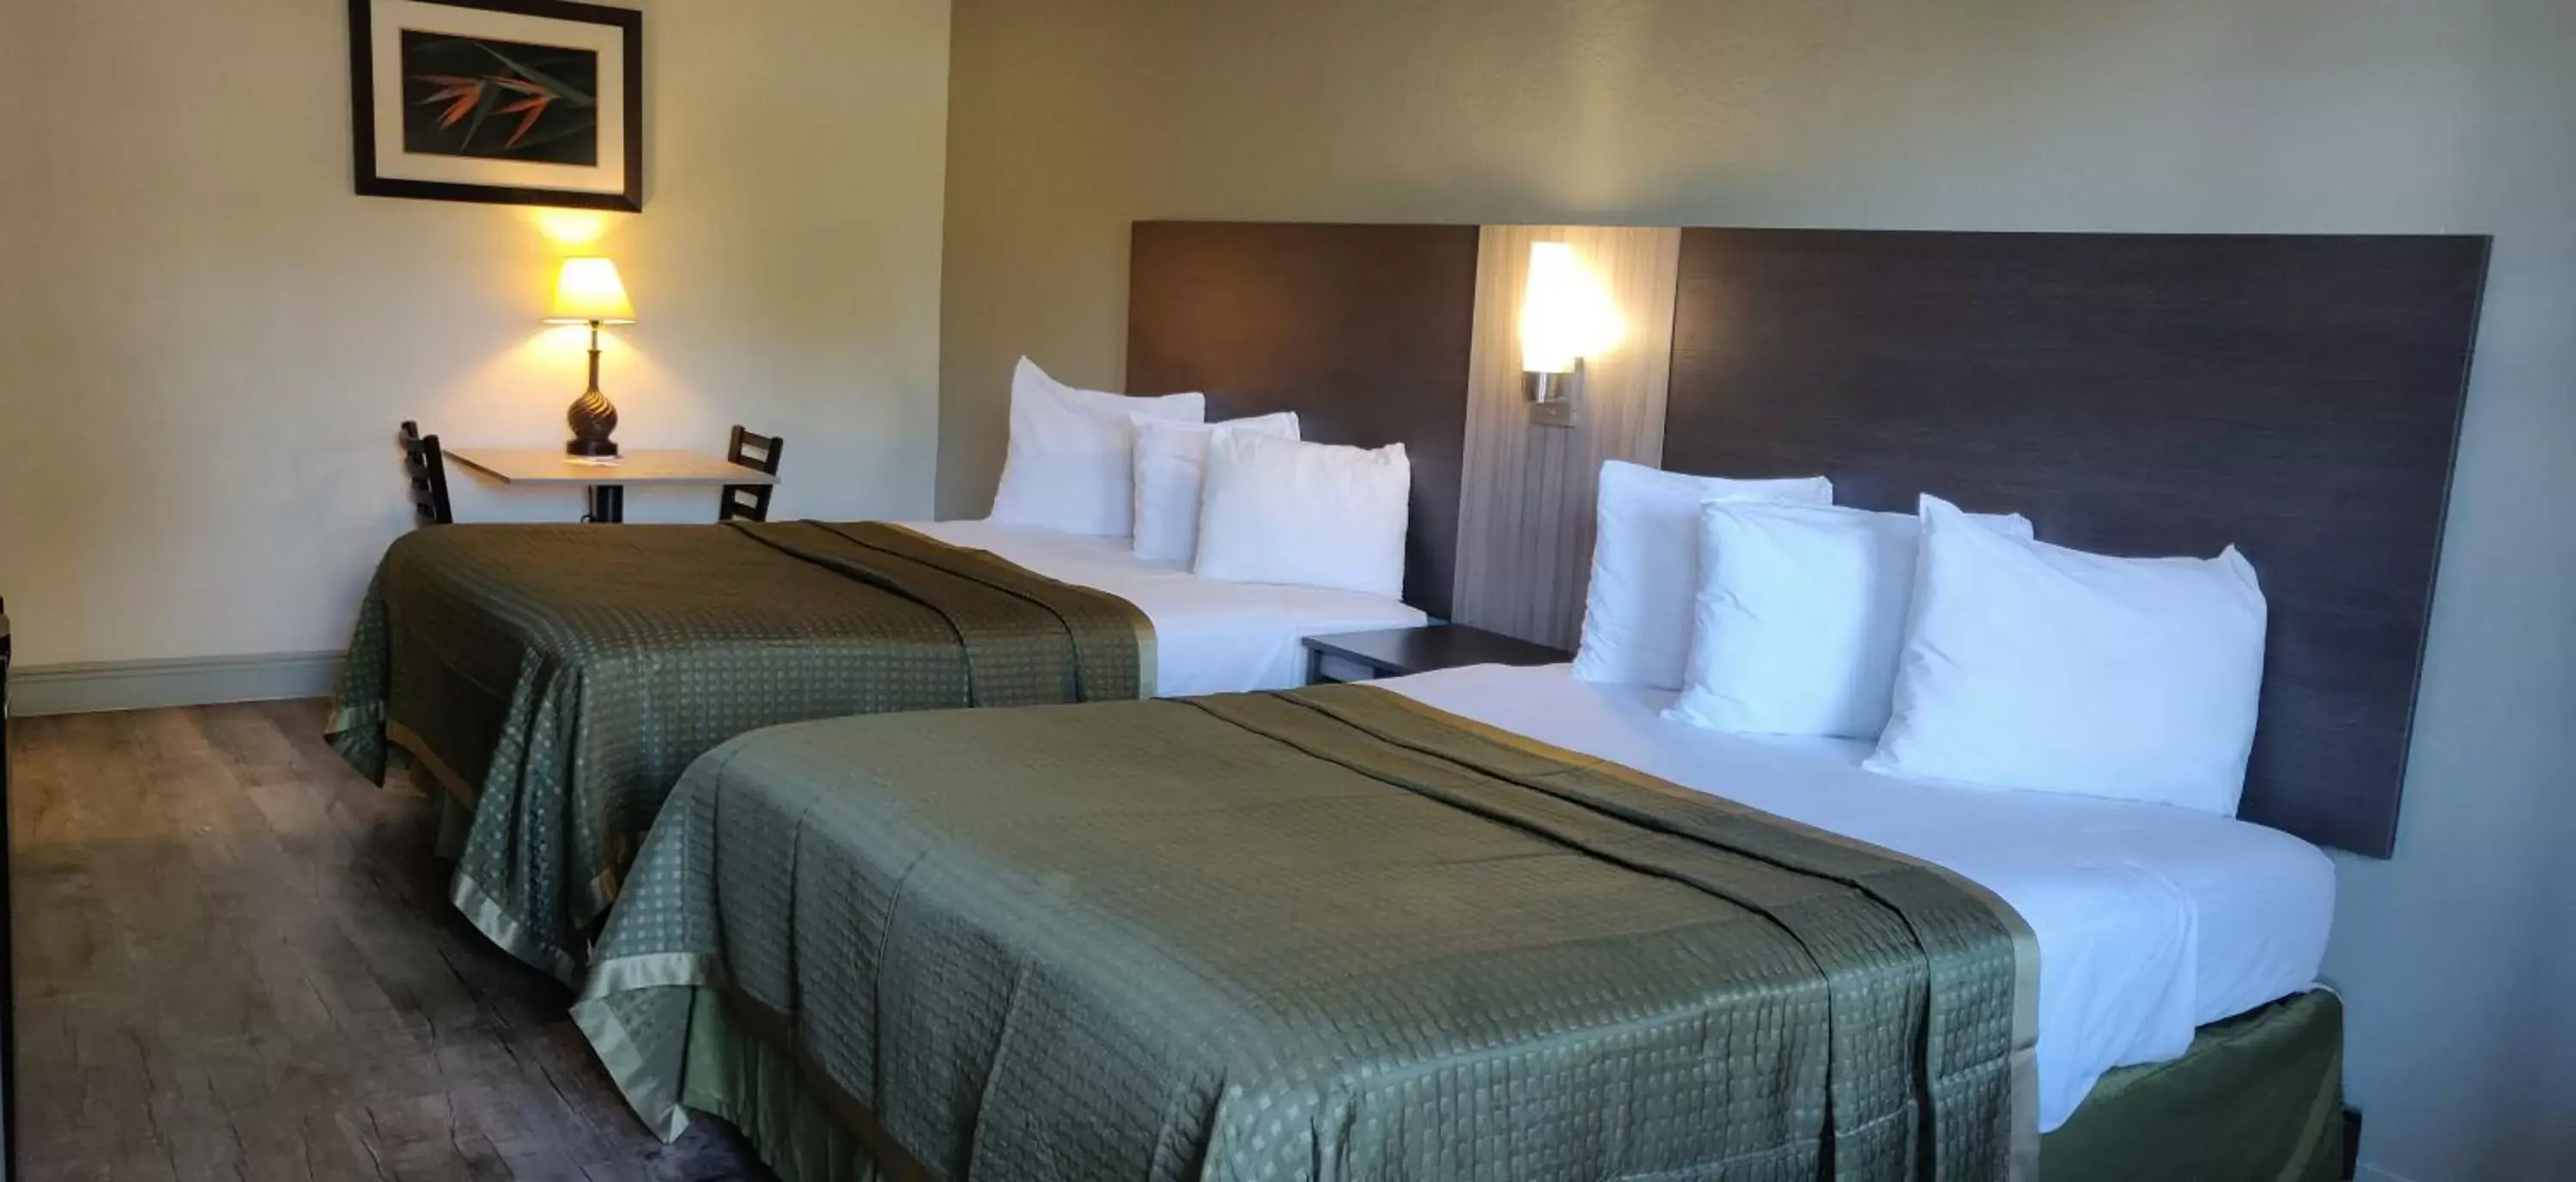 Double Room with Two Double Beds - Accessible/Non-Smoking in Rodeway Inn Near Ybor City - Casino